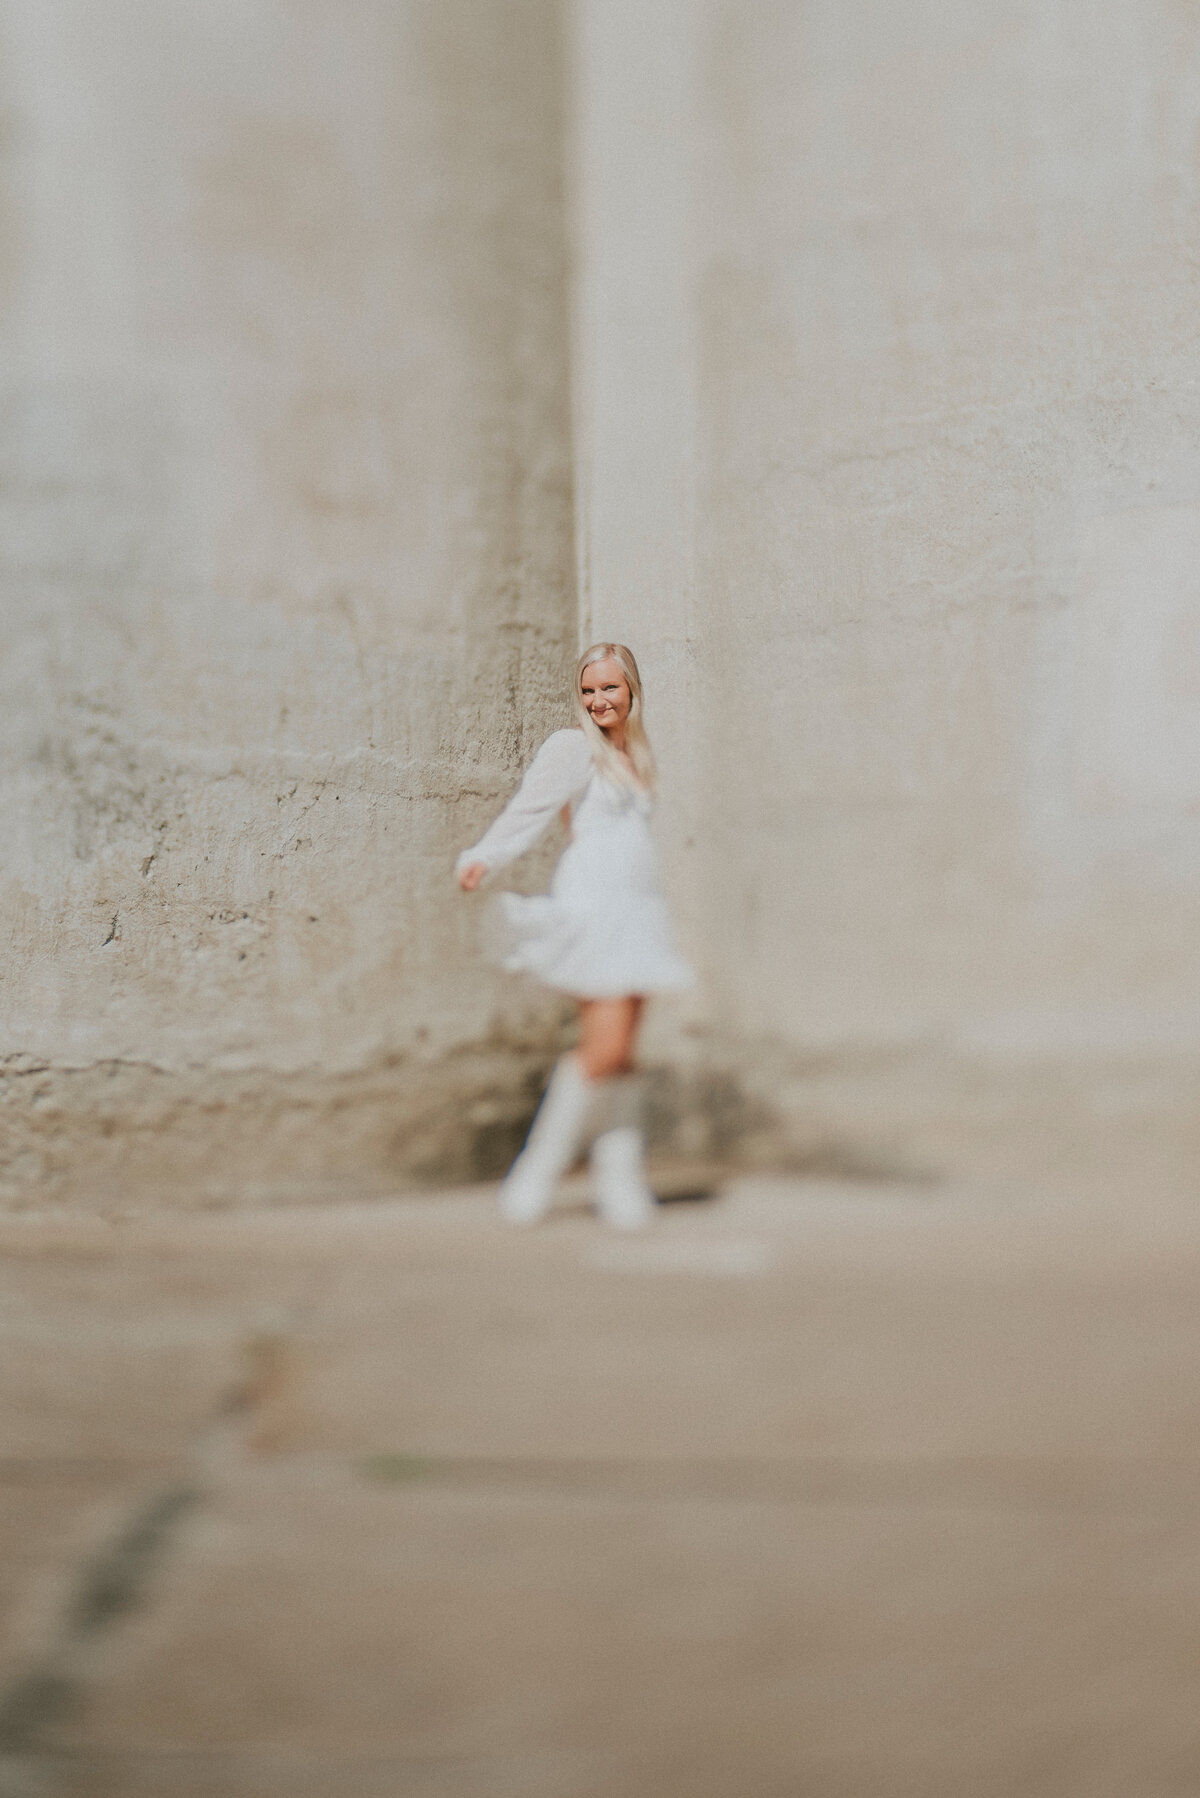 Female dancing in a white dress with a stone wall background in Minneapolis